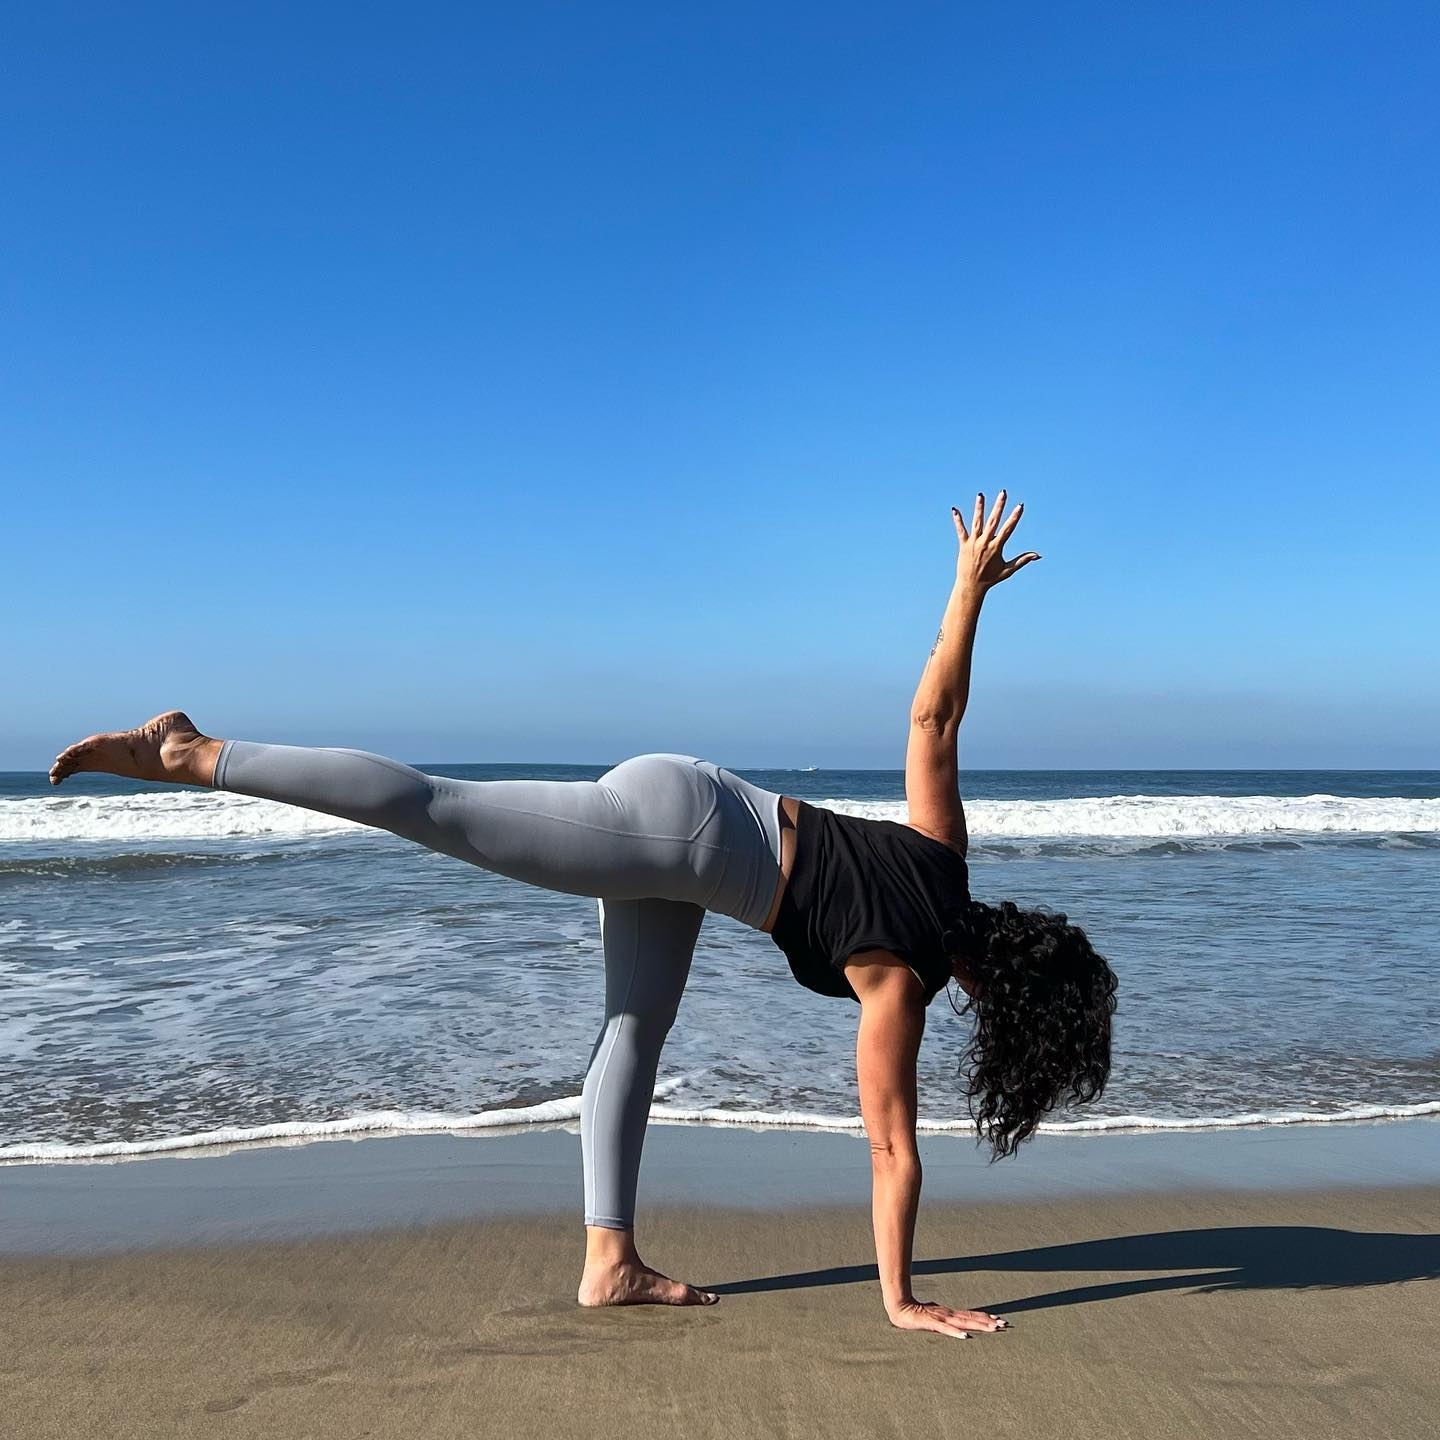 Take Your Yoga Practice to the Beach